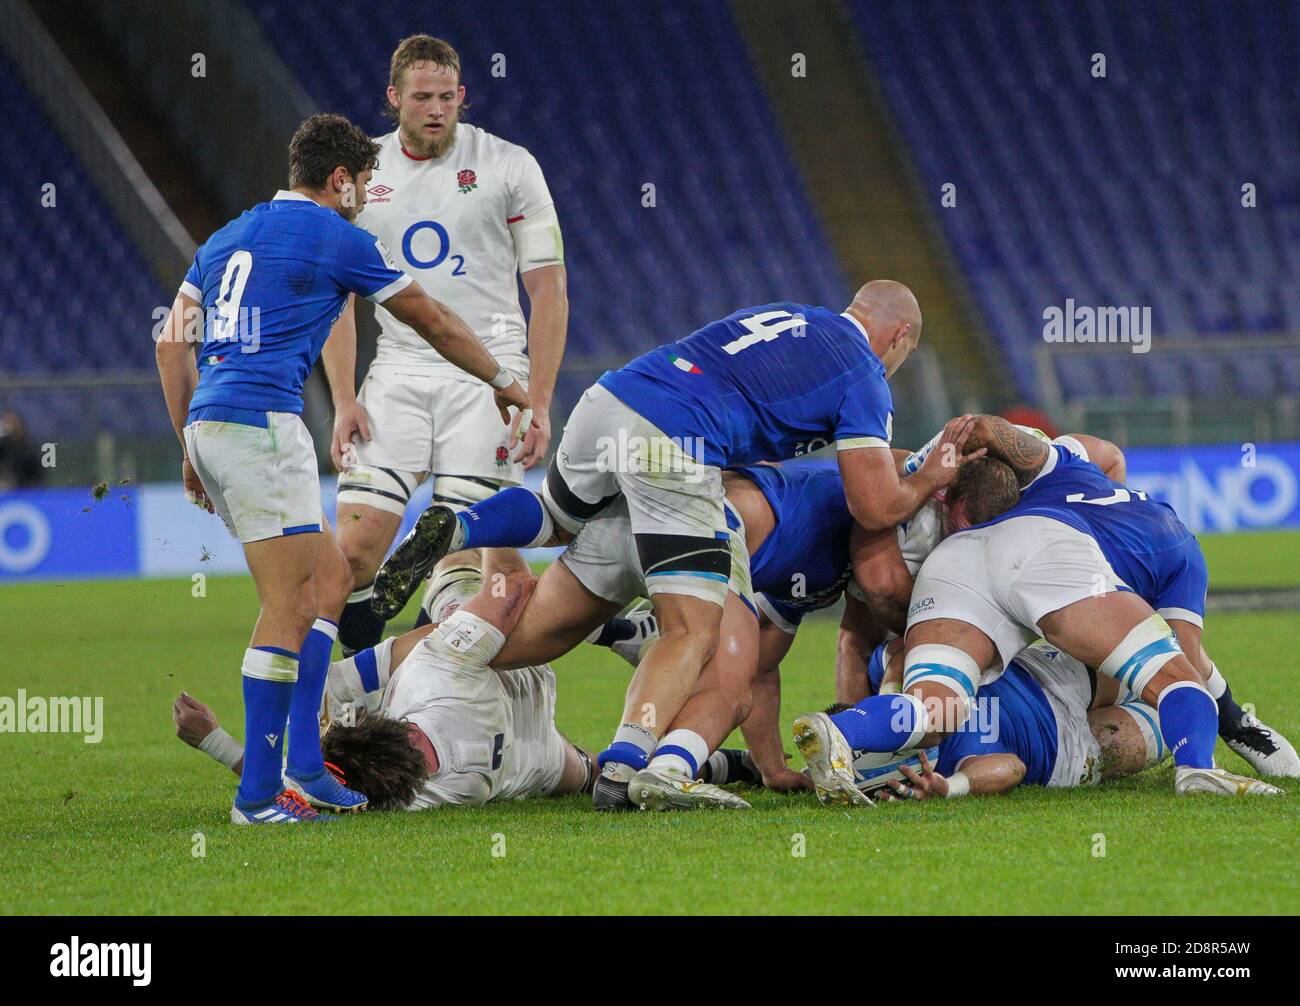 Rome, Italy. 31st Oct, 2020. rome, Italy, Stadio Olimpico, 31 Oct 2020, ruck Italy during Italy vs England - Rugby Six Nations match - Credit: LM/Luigi Mariani Credit: Luigi Mariani/LPS/ZUMA Wire/Alamy Live News Stock Photo